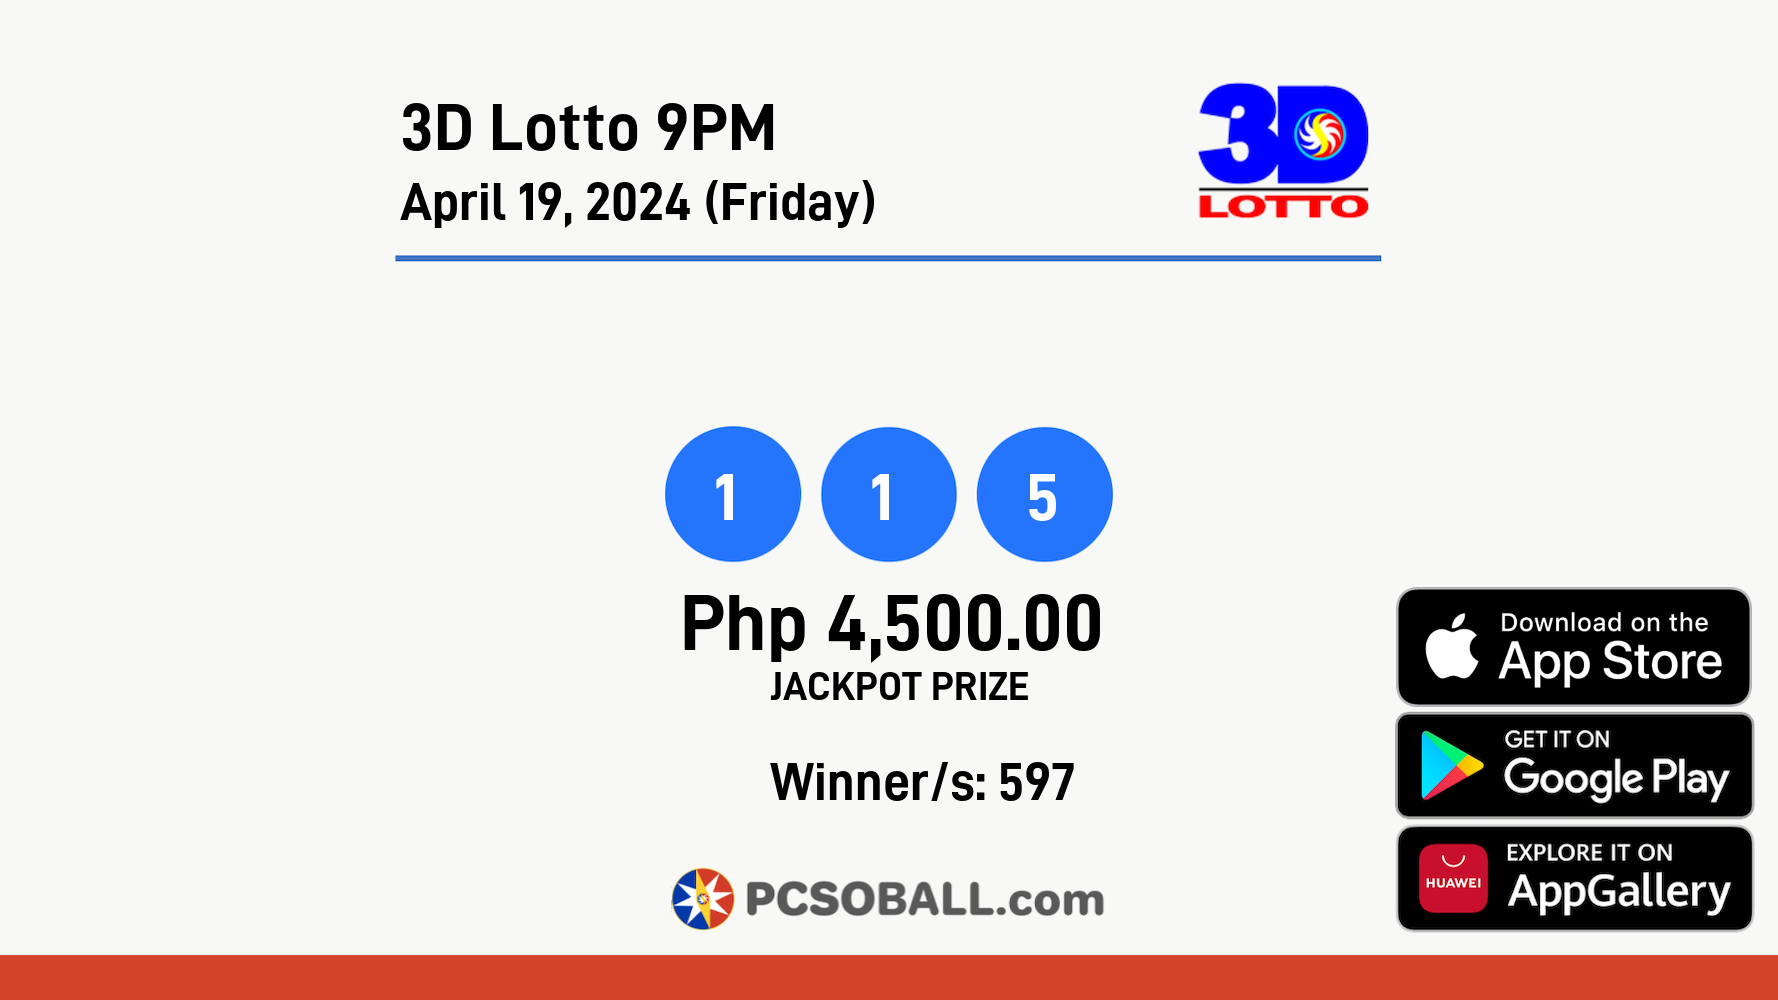 3D Lotto 9PM April 19, 2024 (Friday) Result